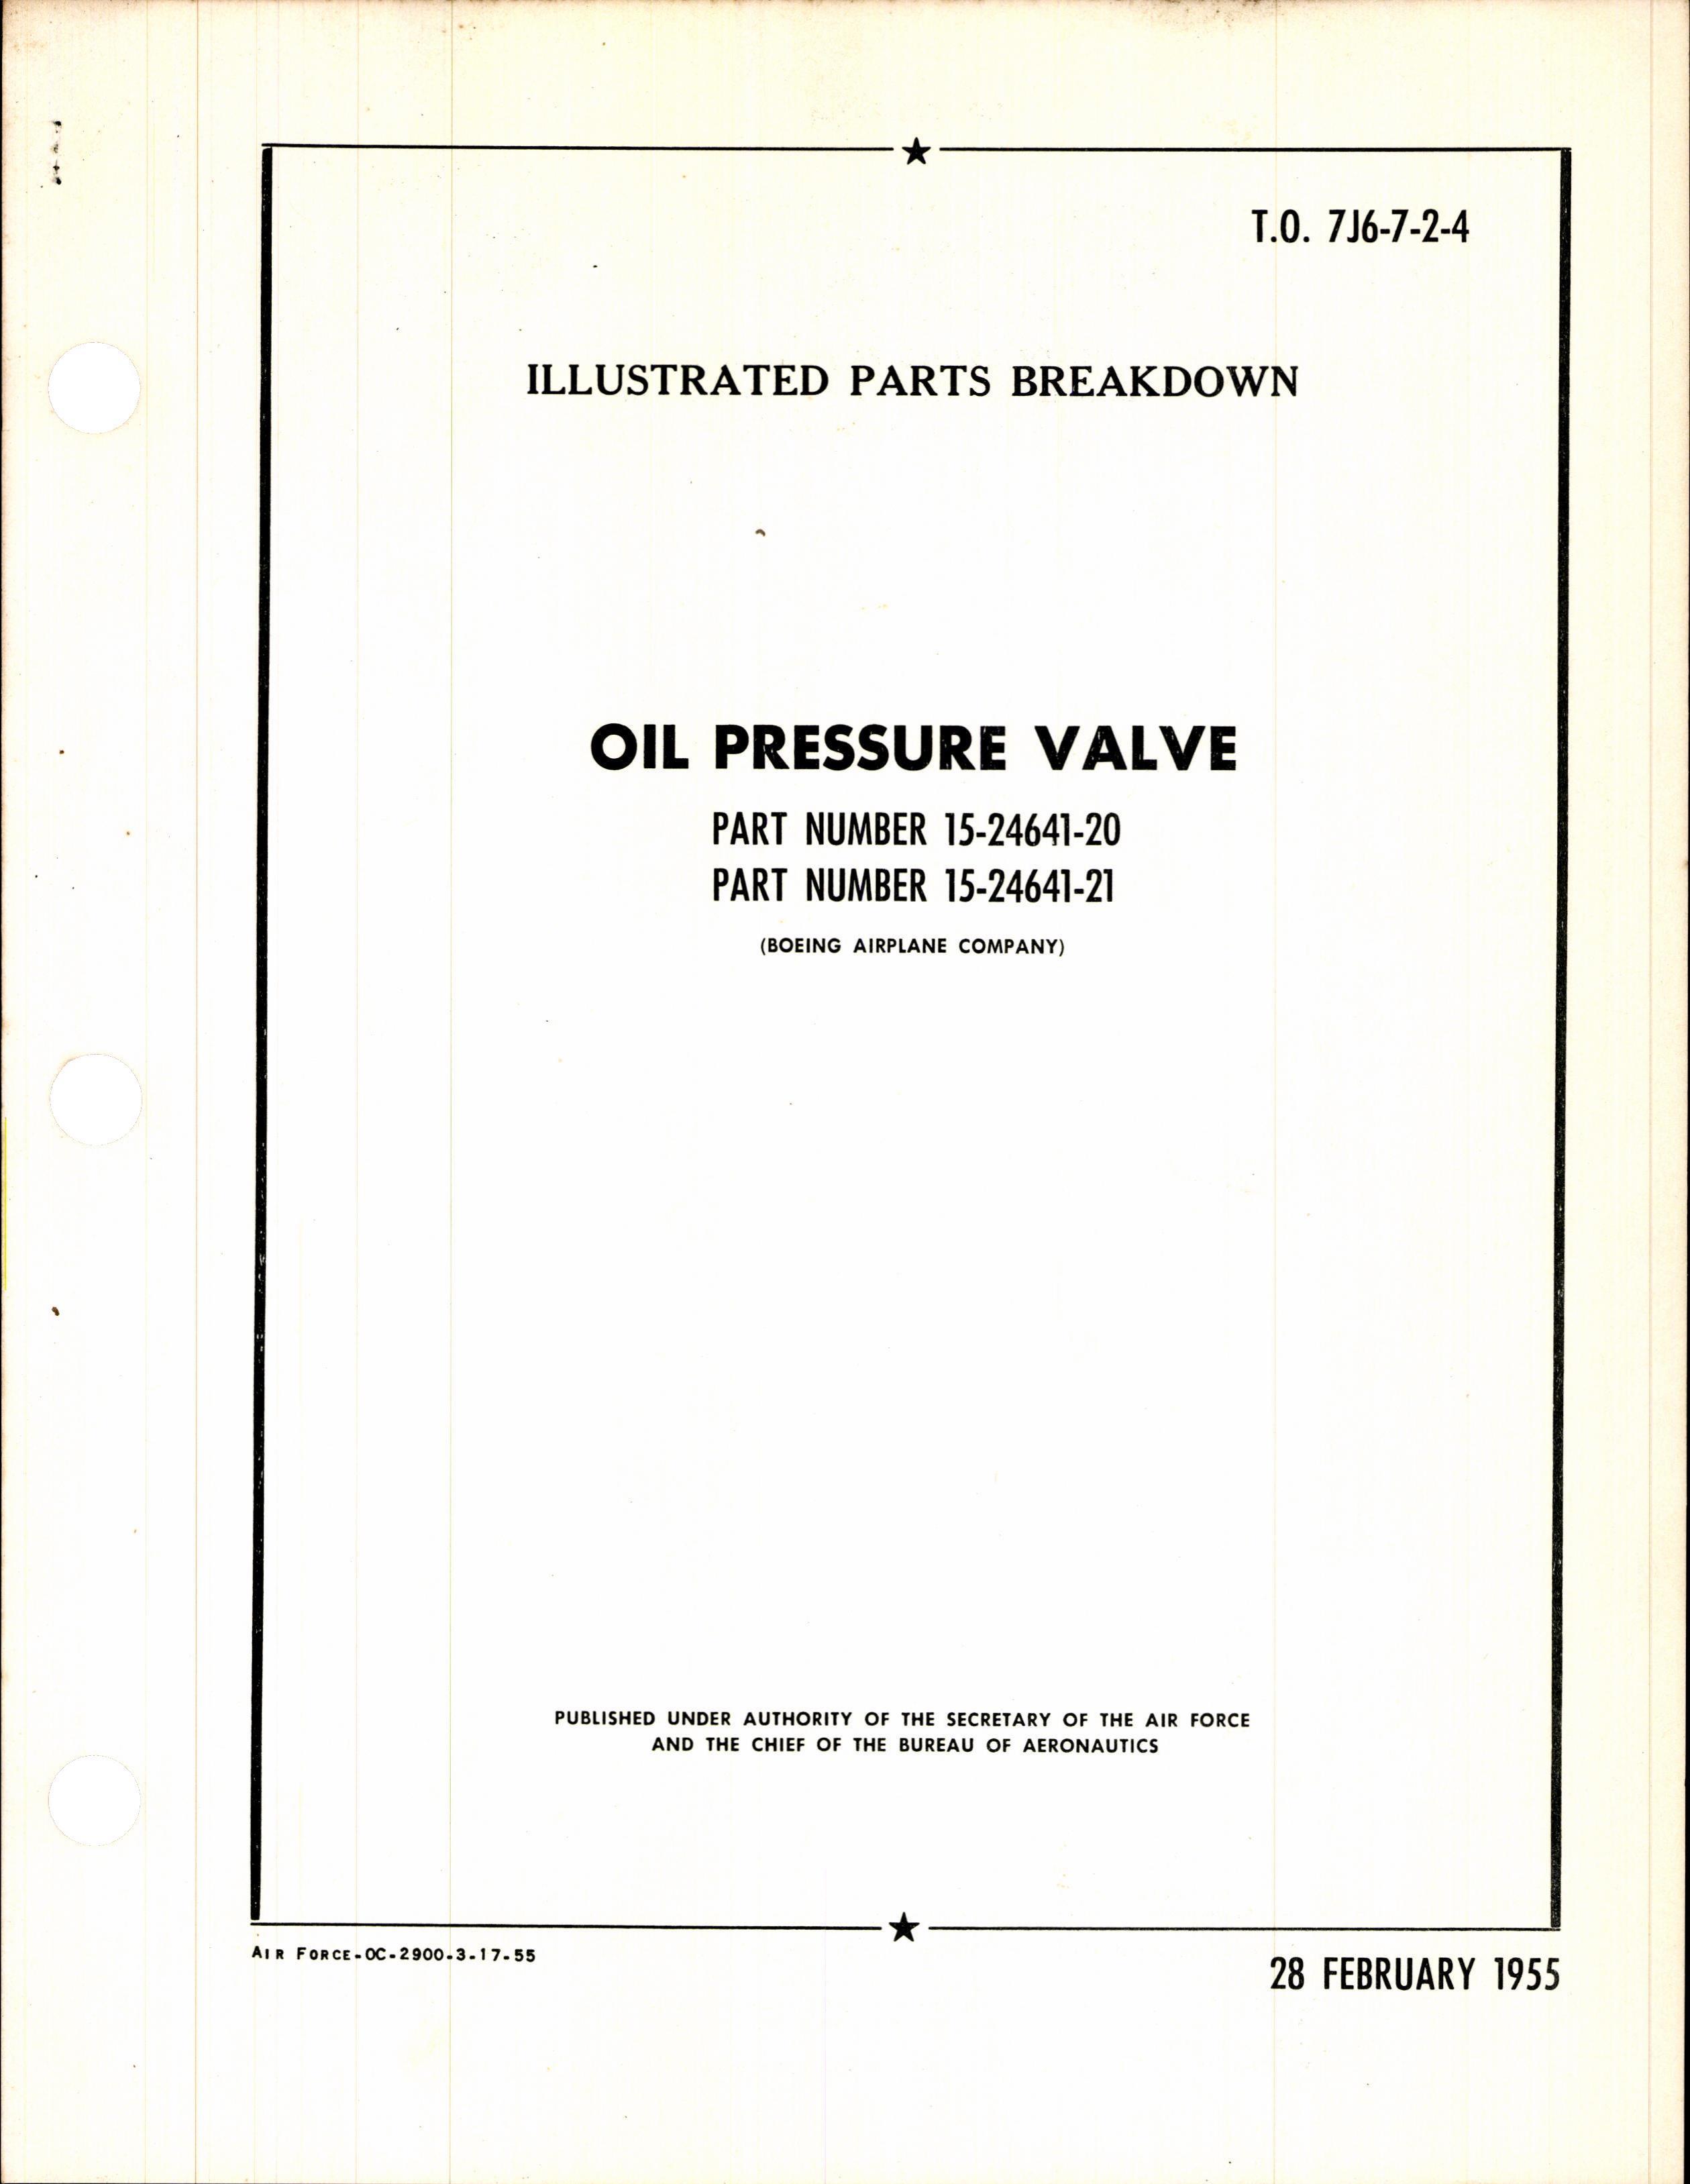 Sample page 1 from AirCorps Library document: Illustrated Parts Breakdown for Oil Pressure Valve 15-24641-20 and -21